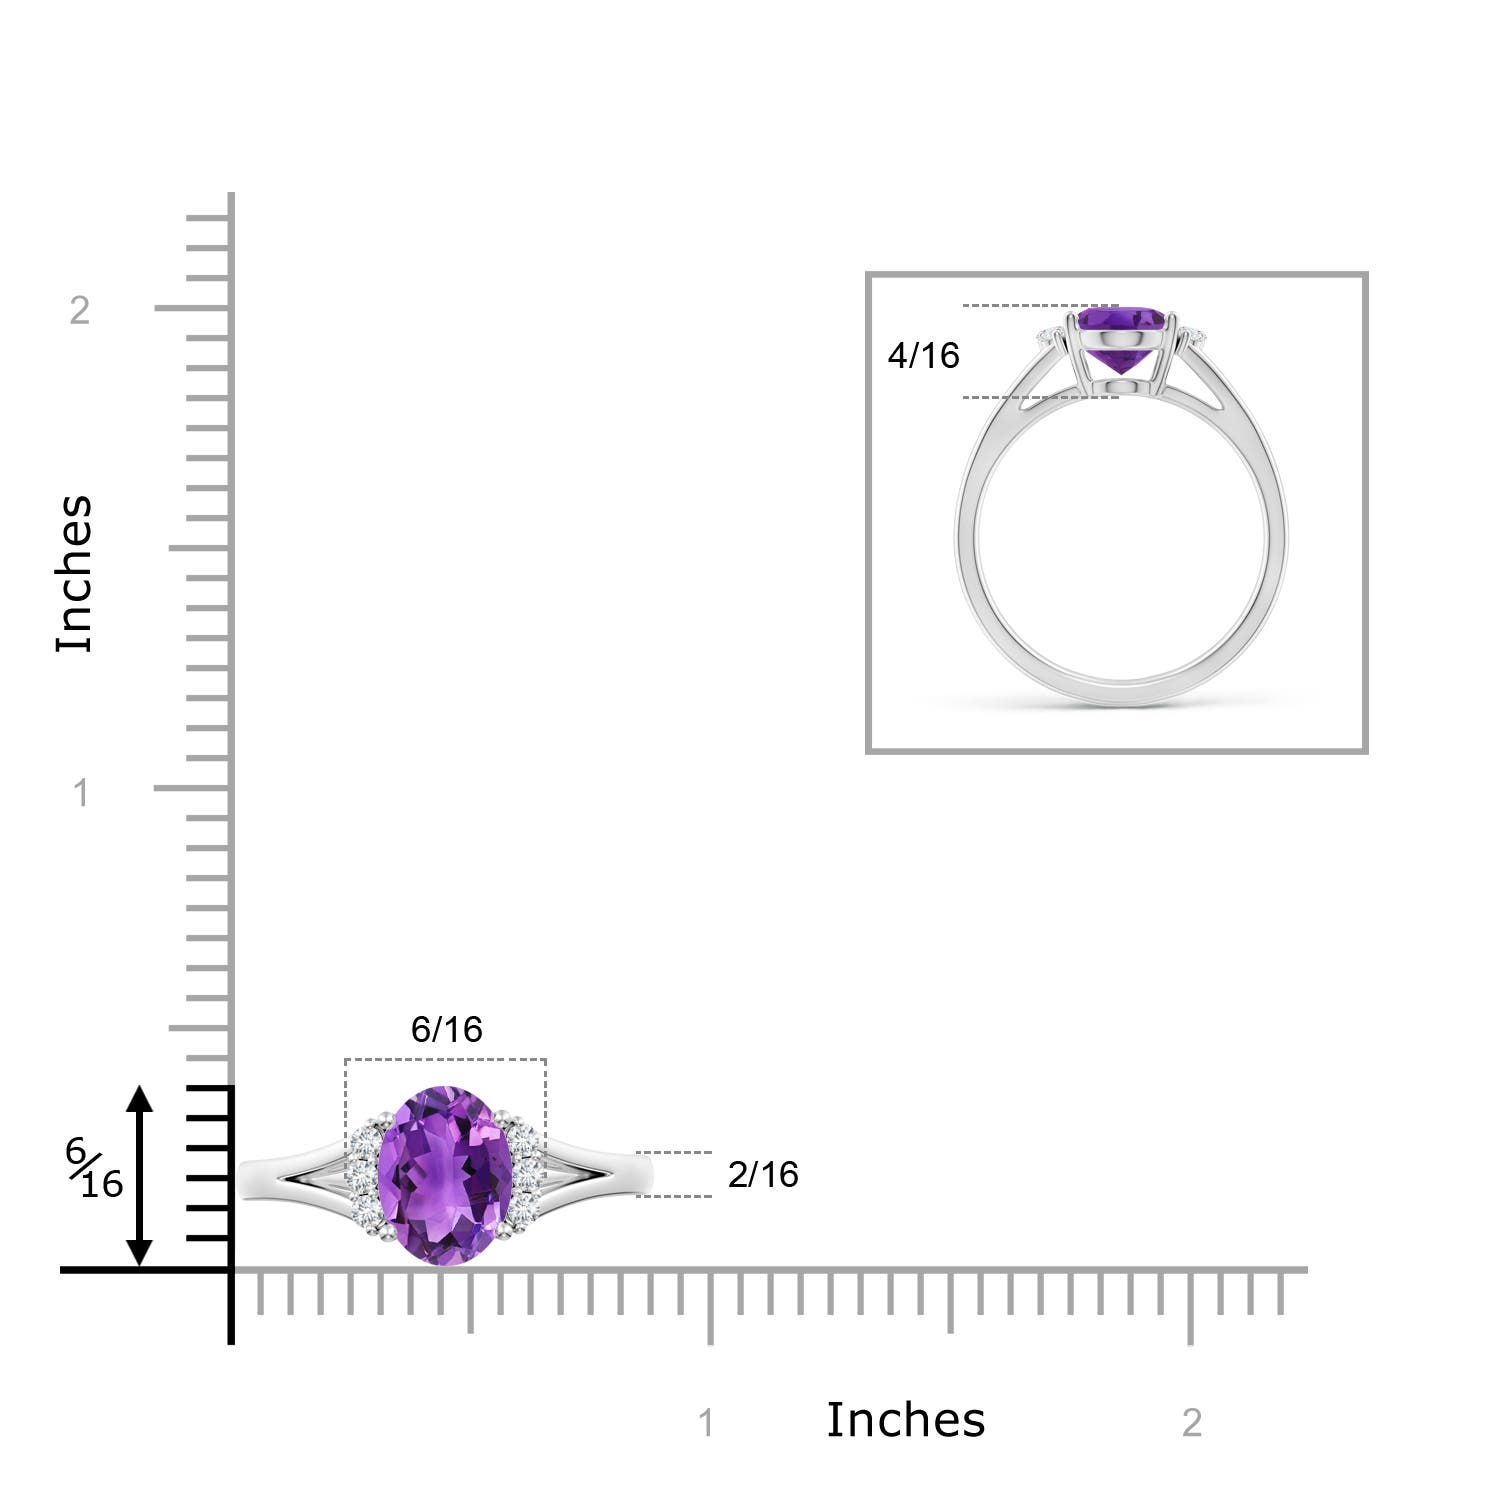 AAA - Amethyst / 1.71 CT / 14 KT White Gold